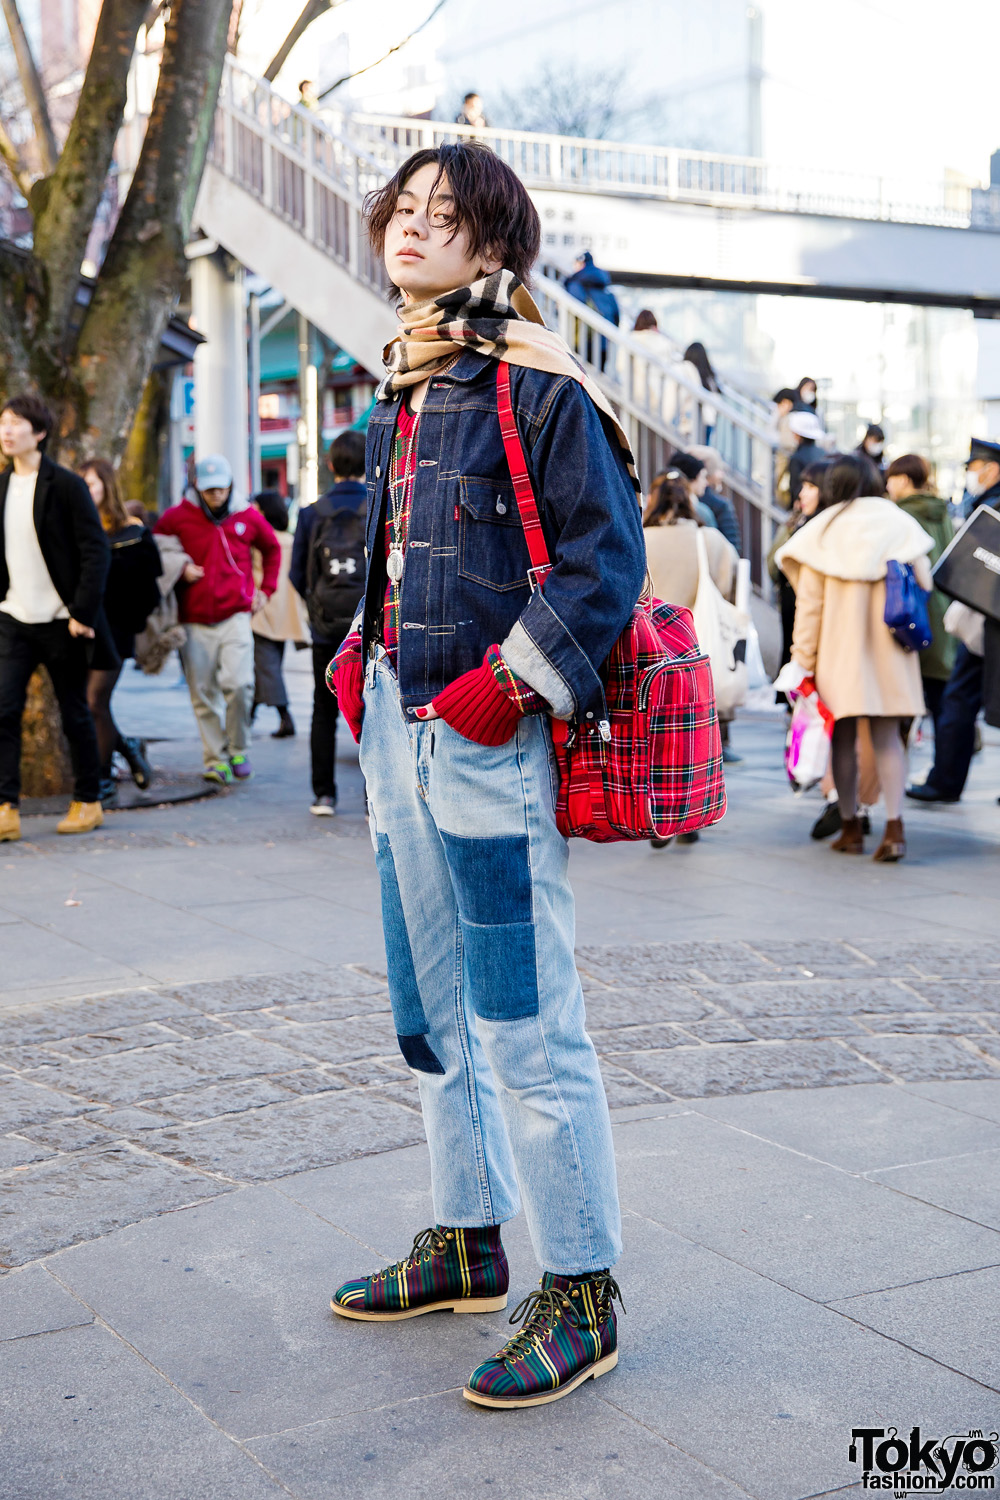 Japanese Model in Mixed Prints and Double Denim